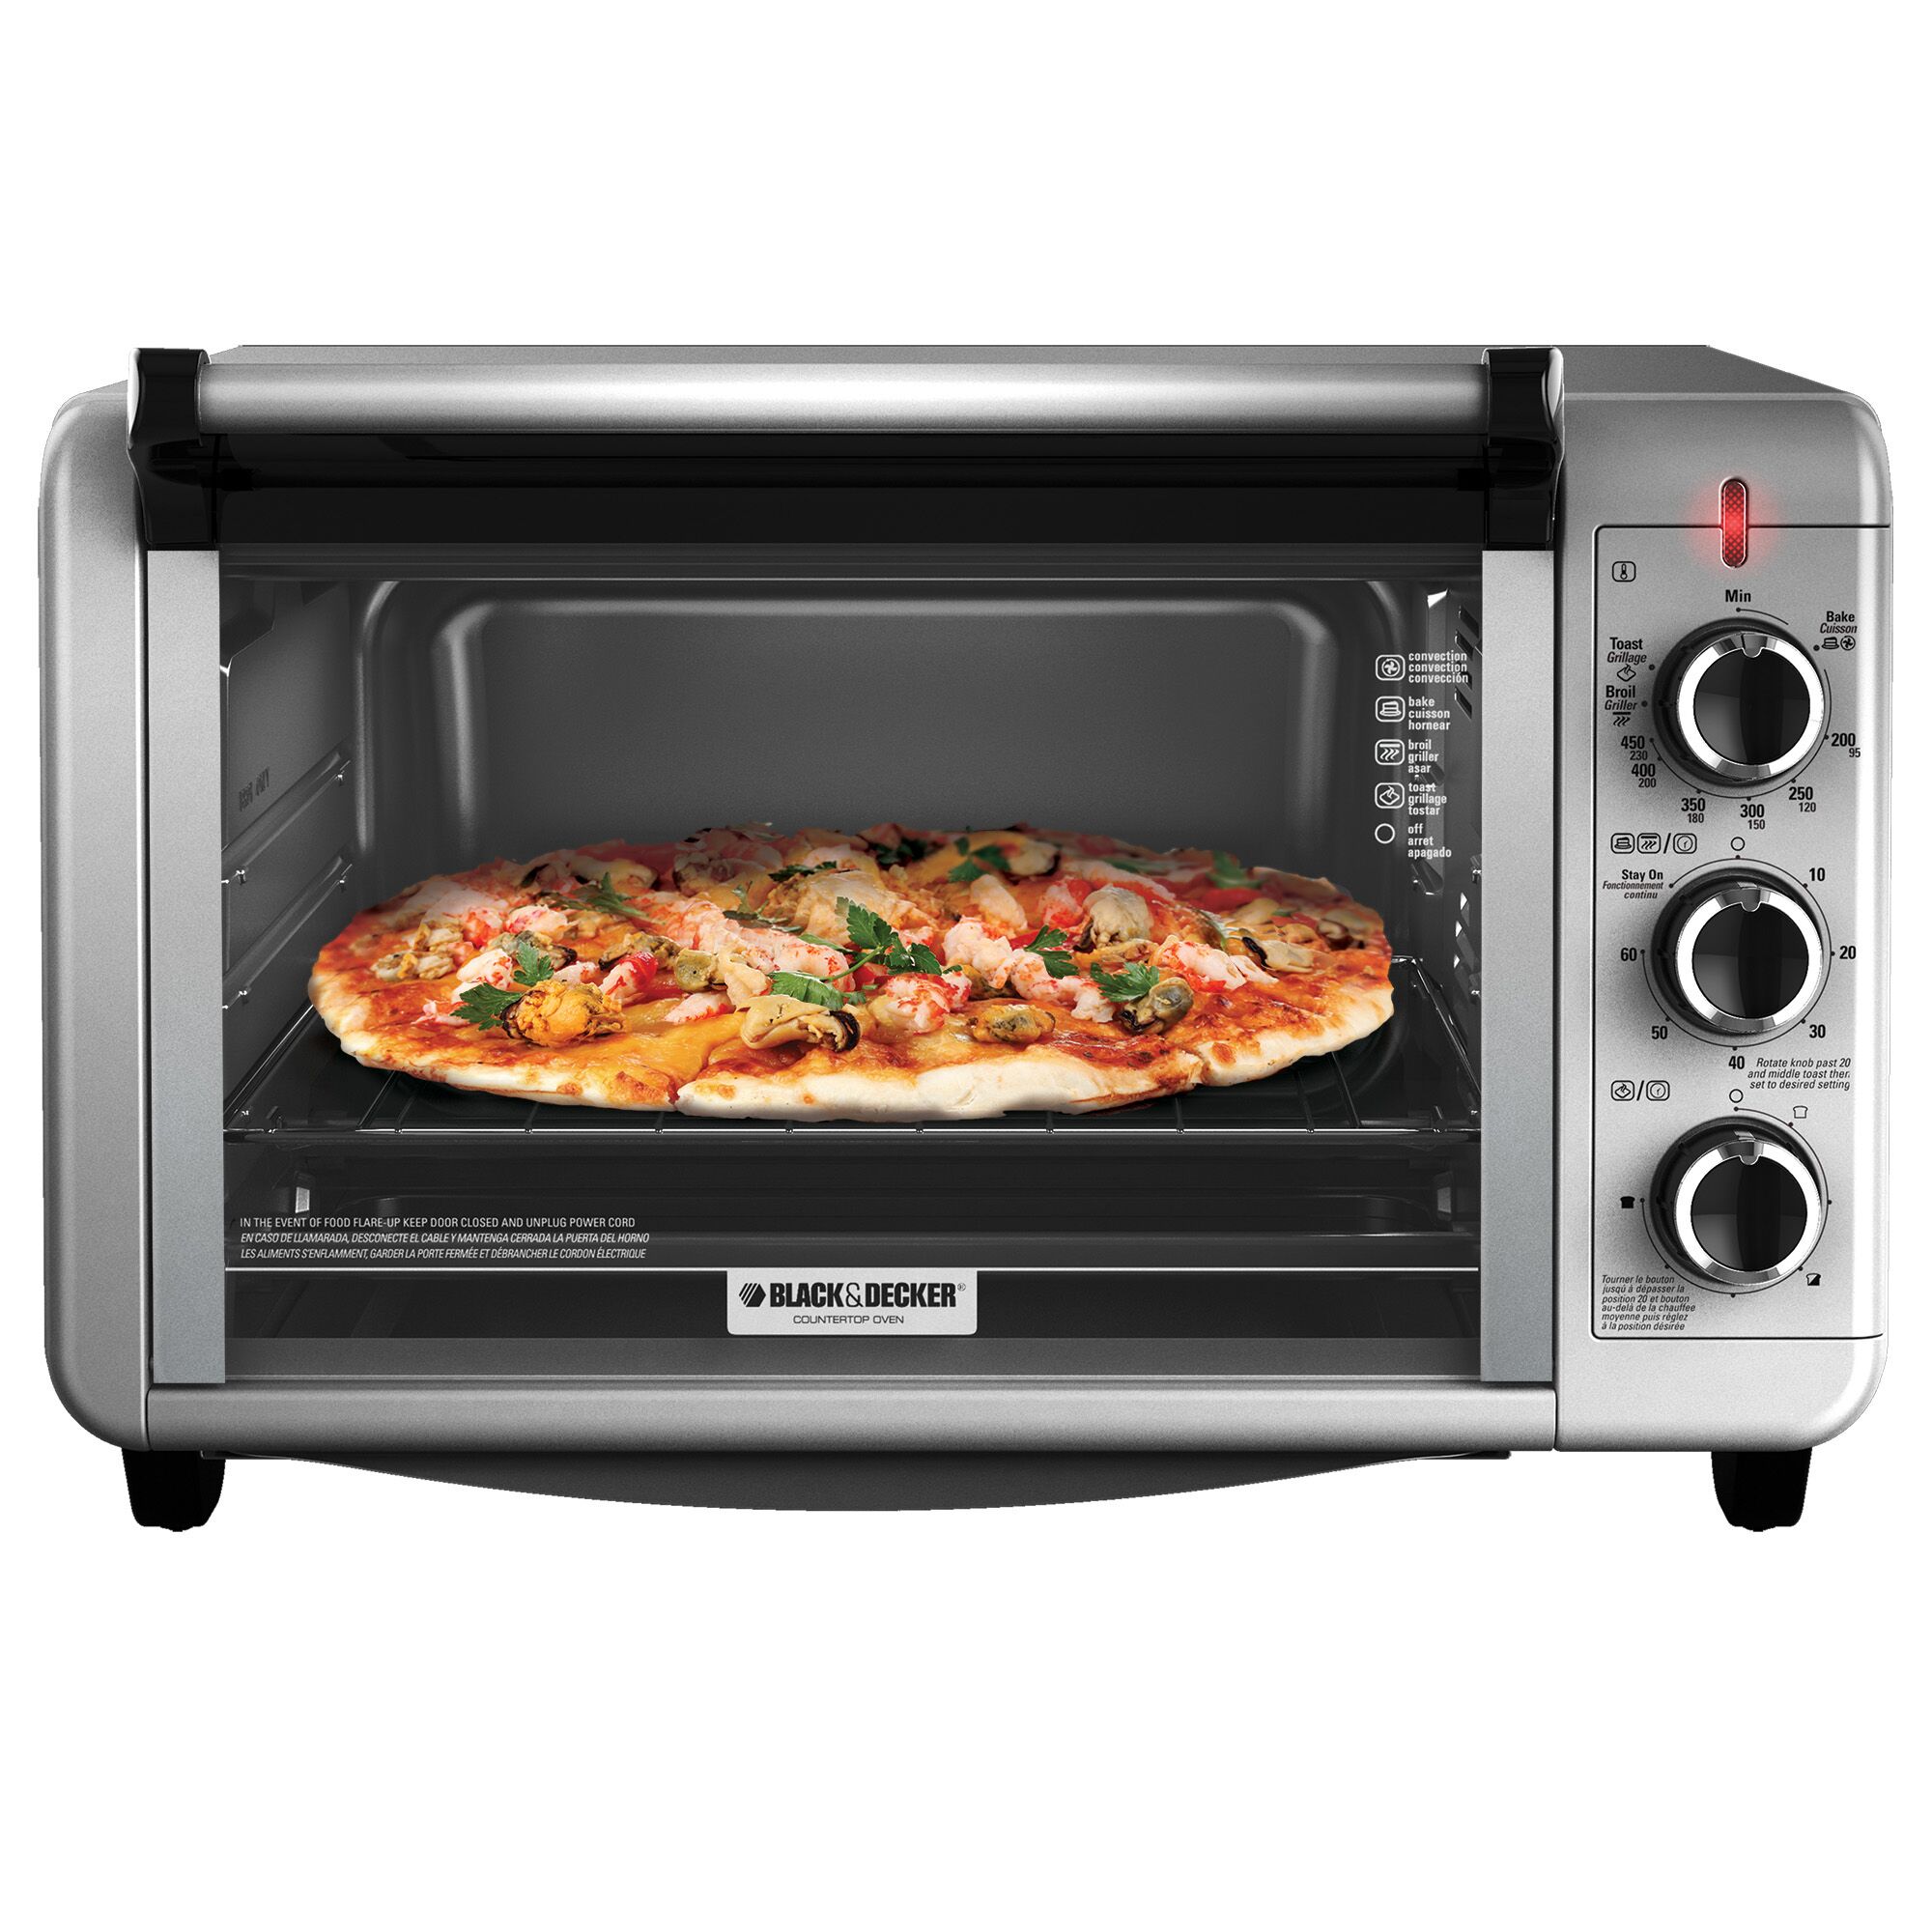 Profile of 6 Slice Countertop Toaster Oven baking pizza.